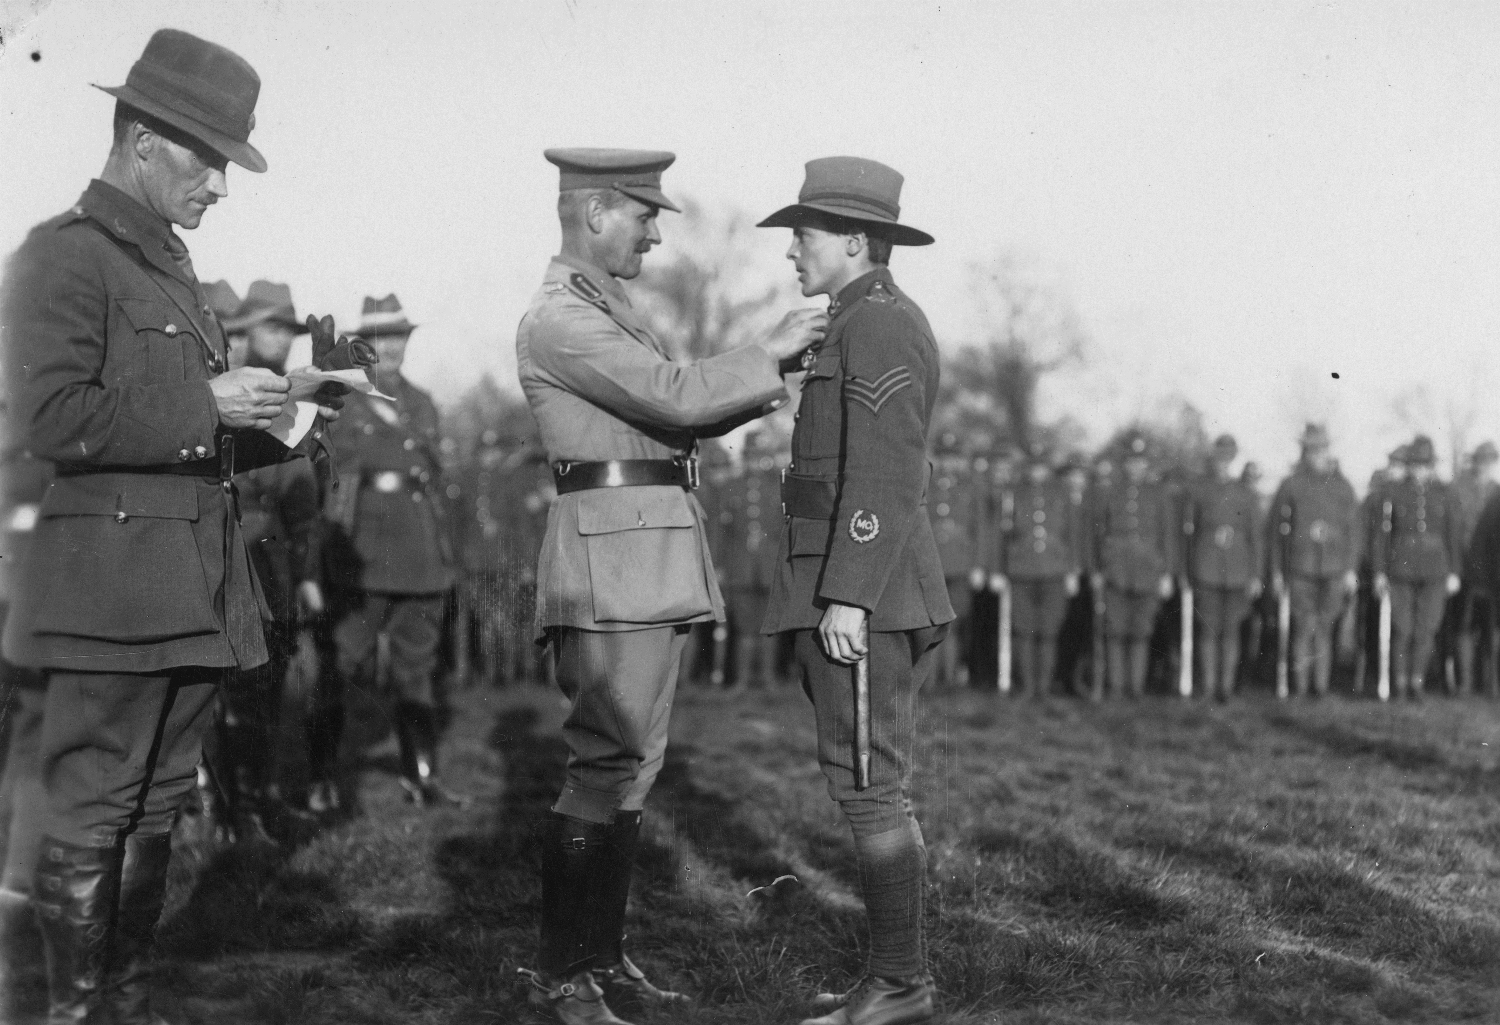 Lieutenant-General Sir William Birdwood presenting Sergeant Frederick Watson with the Distinguished Conduct Medal for bravery at Gallipoli.